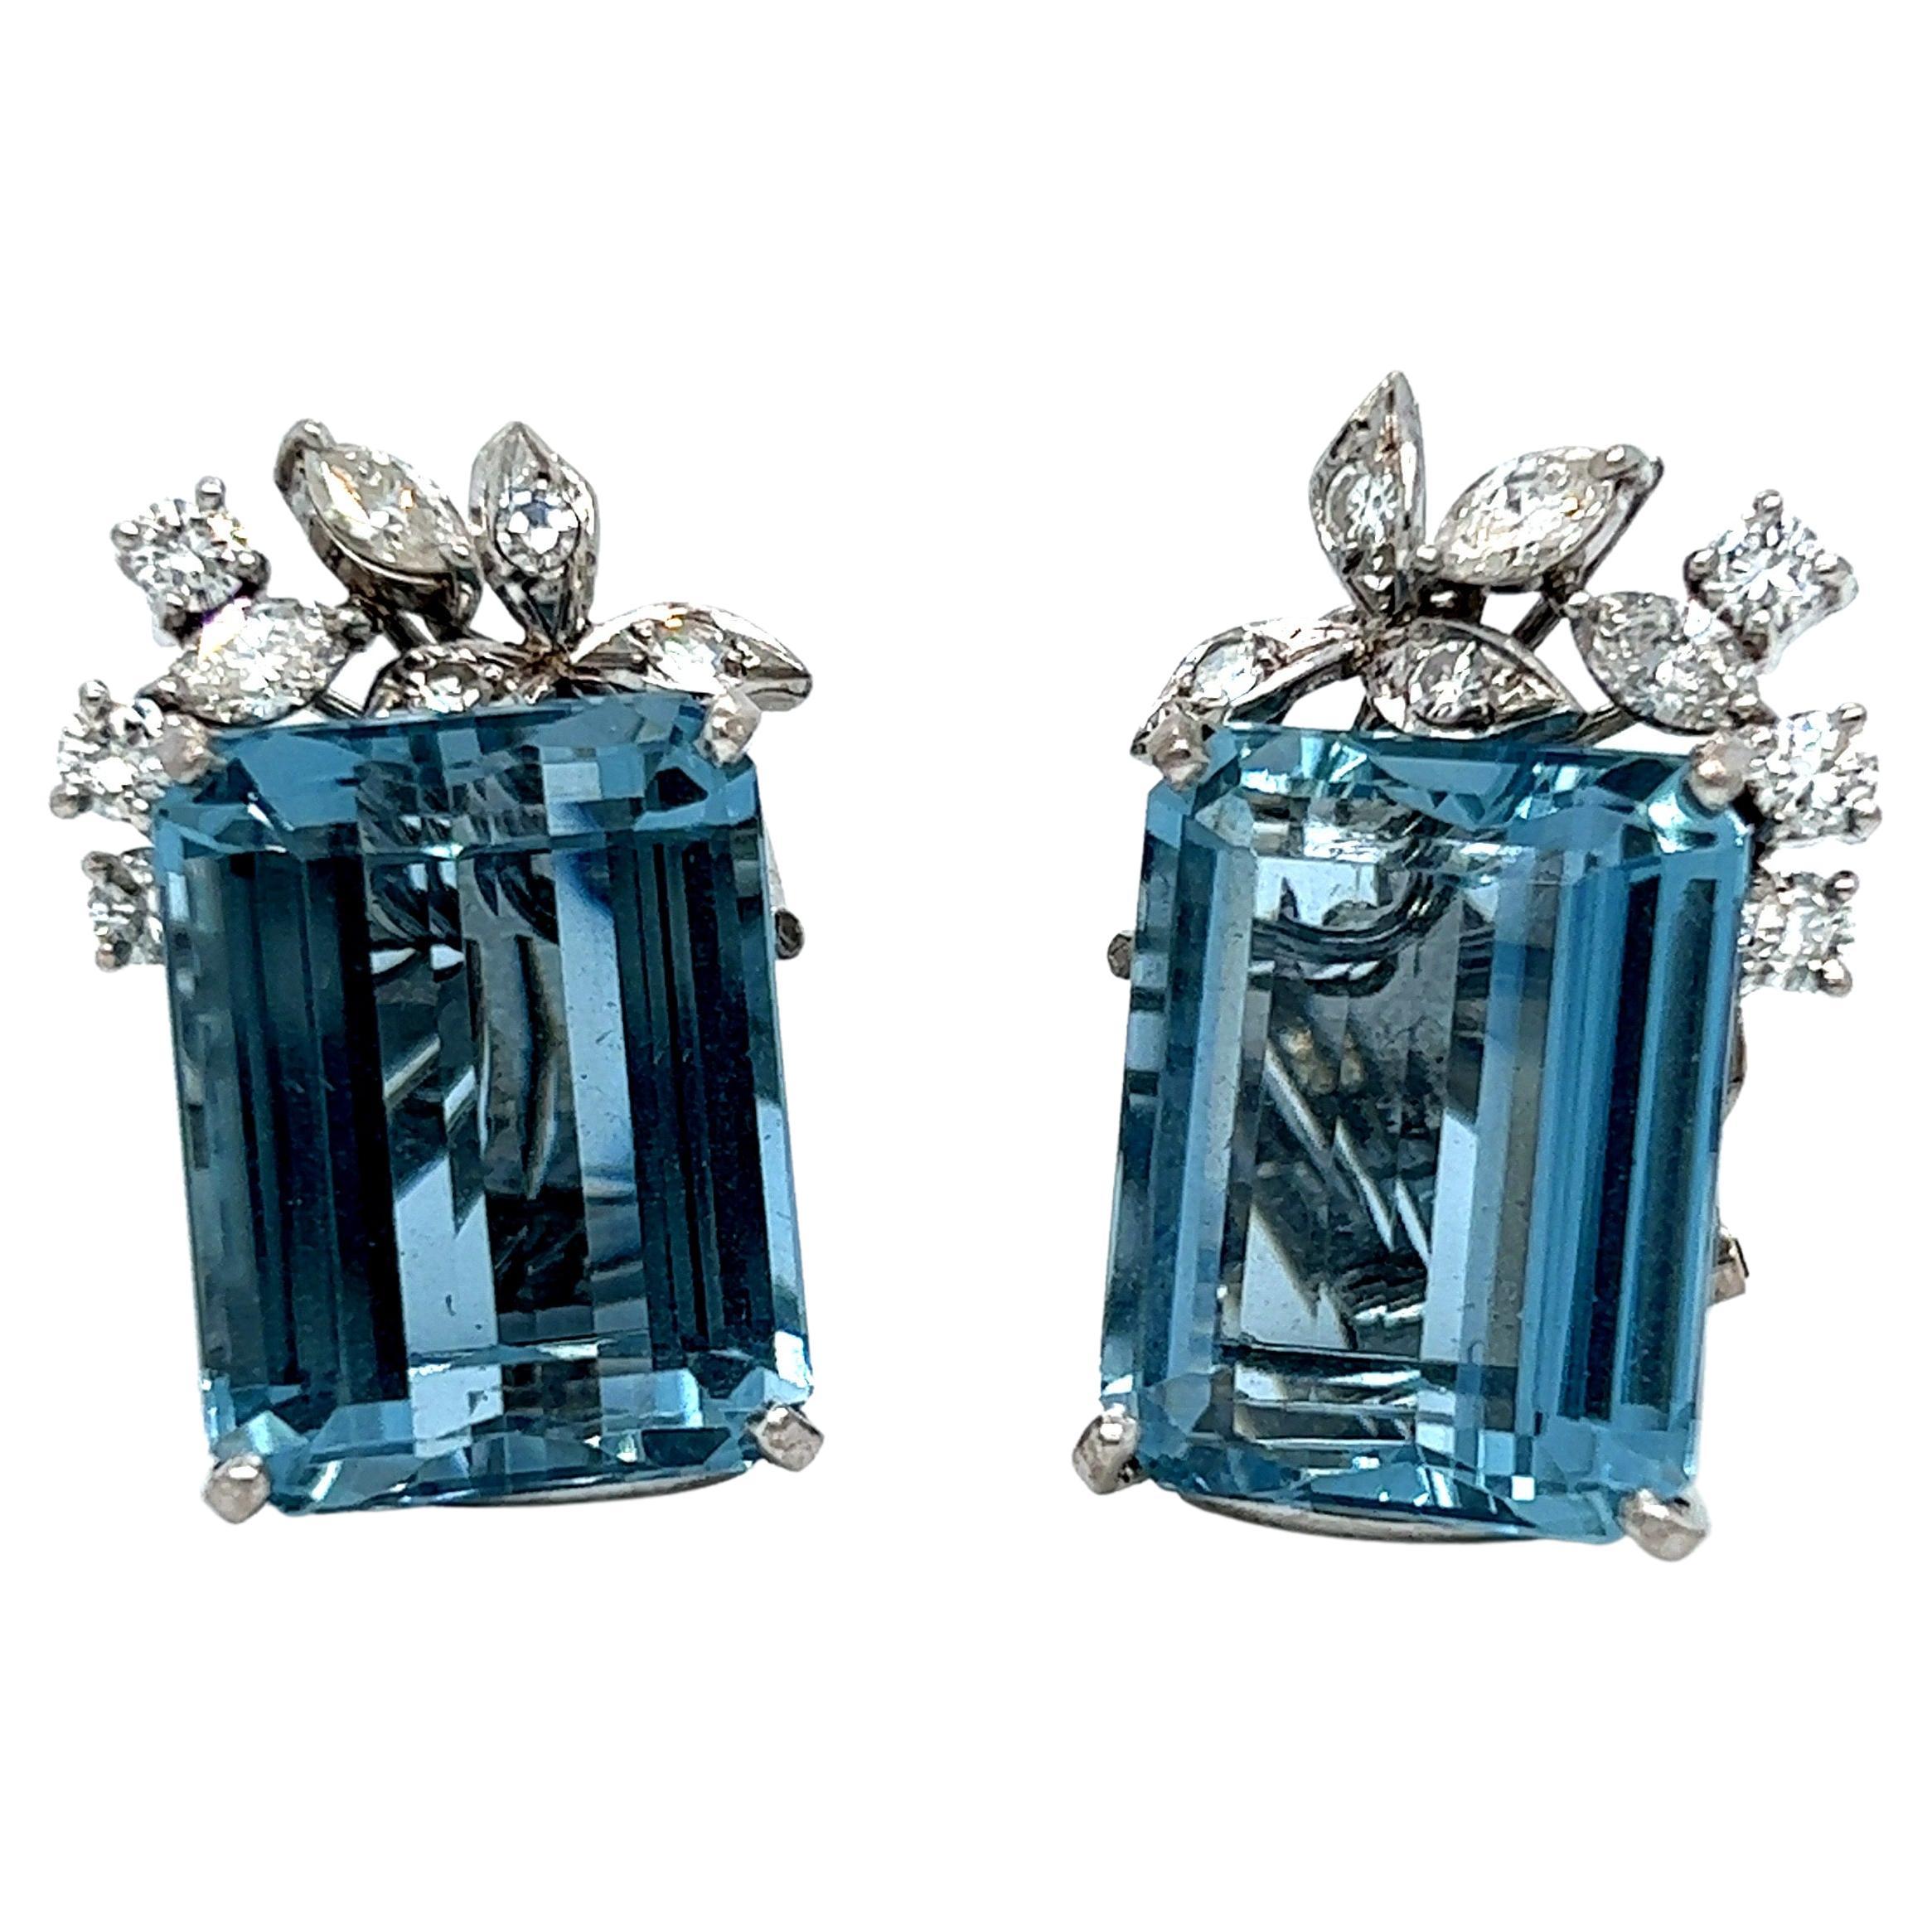 Fantastic Retro Vintage 14K White Gold Blue Topaz Earrings with Diamond Accents